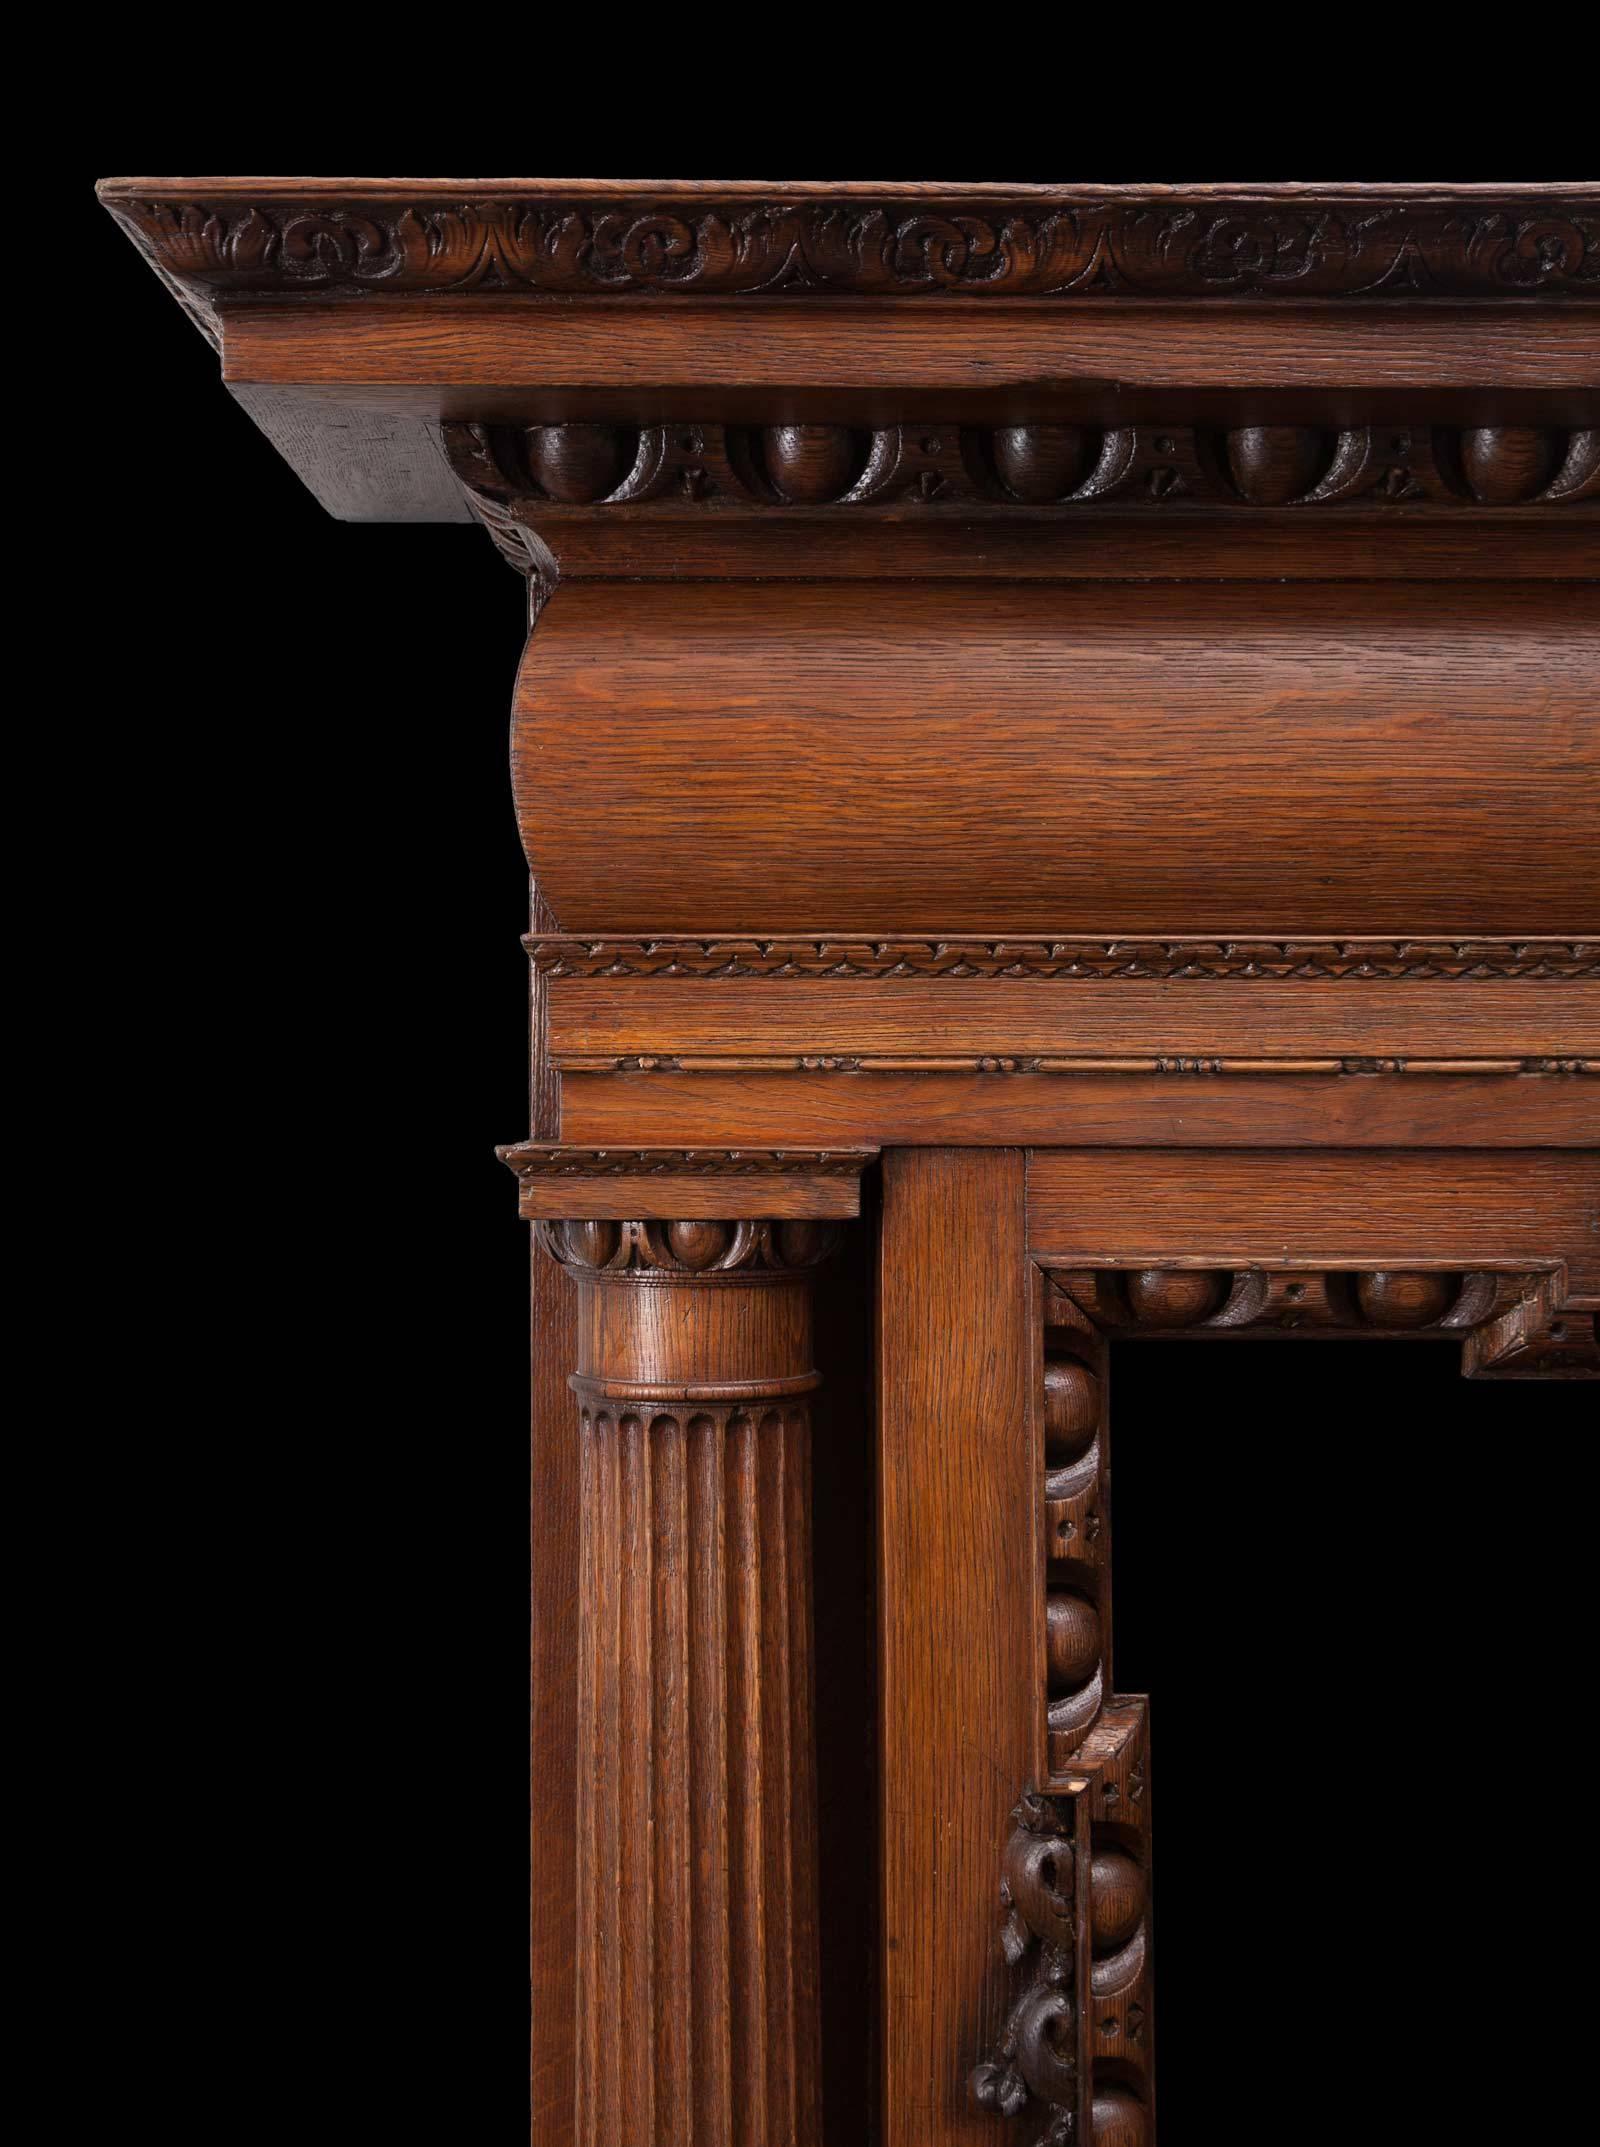 A large antique English carved oak mantelpiece in the Palladian style. With full rounded and fluted Doric columns, egg and dart mouldings and a carved floral centre tablet. Beautifully made during the Victorian period, from a wonderful coloured oak.